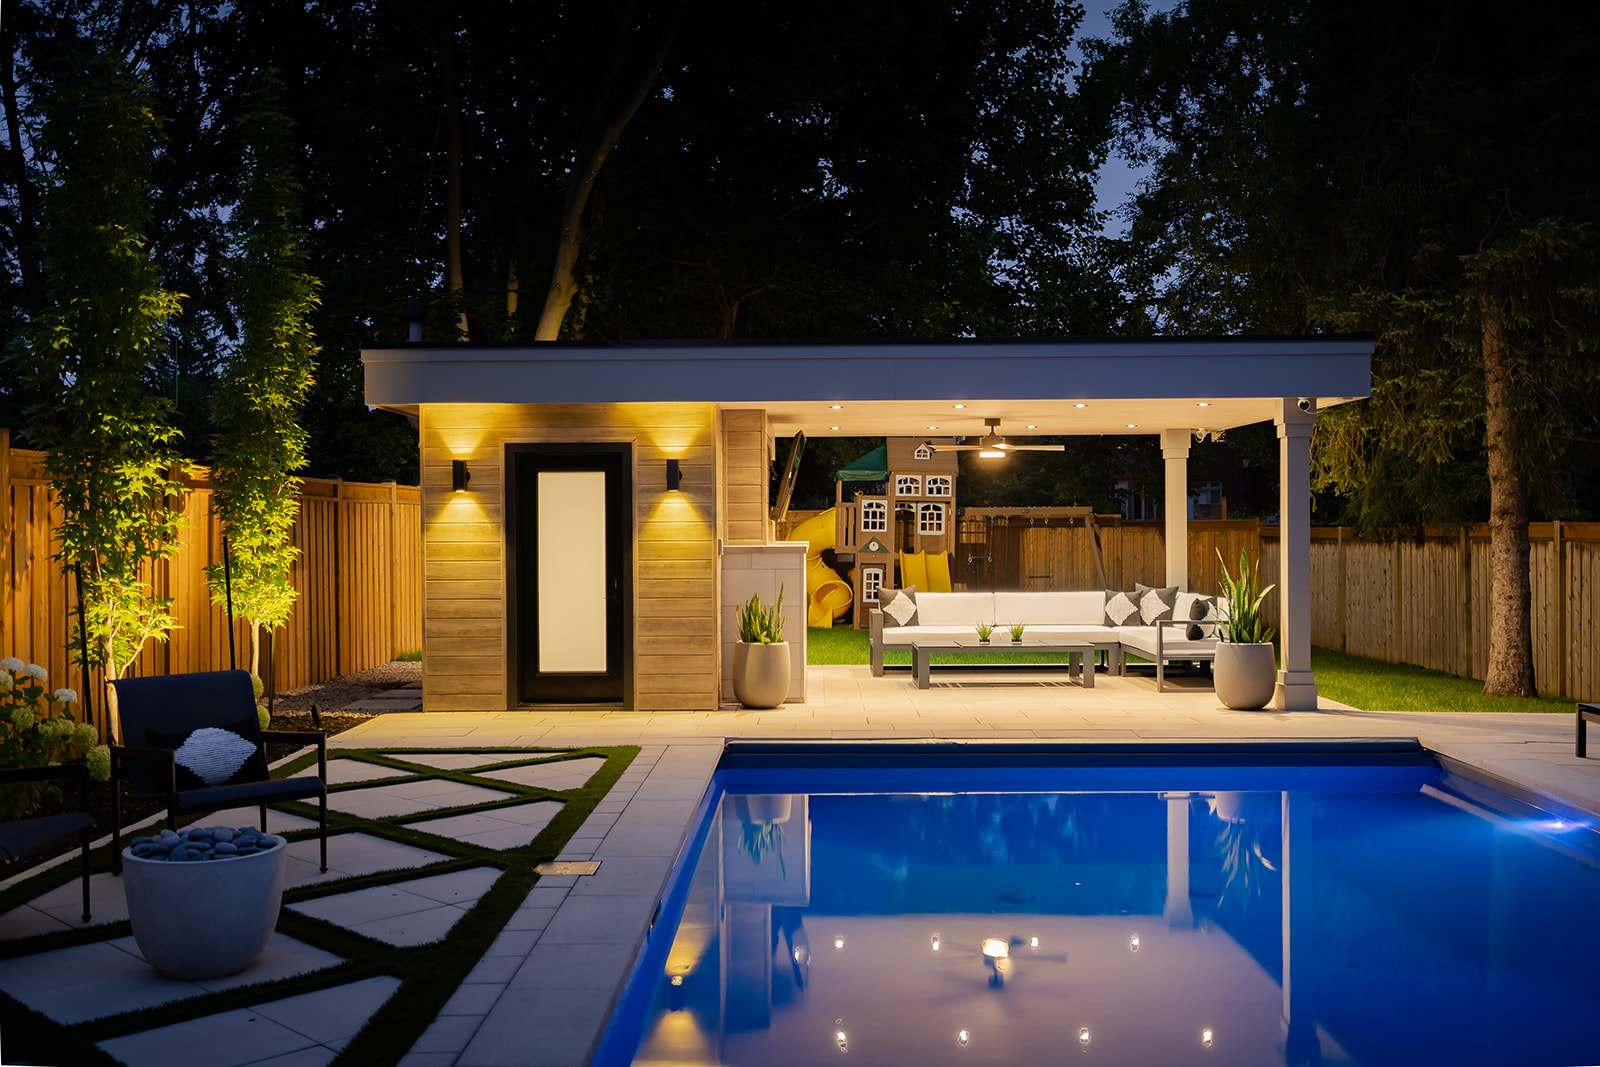 A a pool house with lights on, an outdoor patio set to the right and chairs on the left on the patio stones.